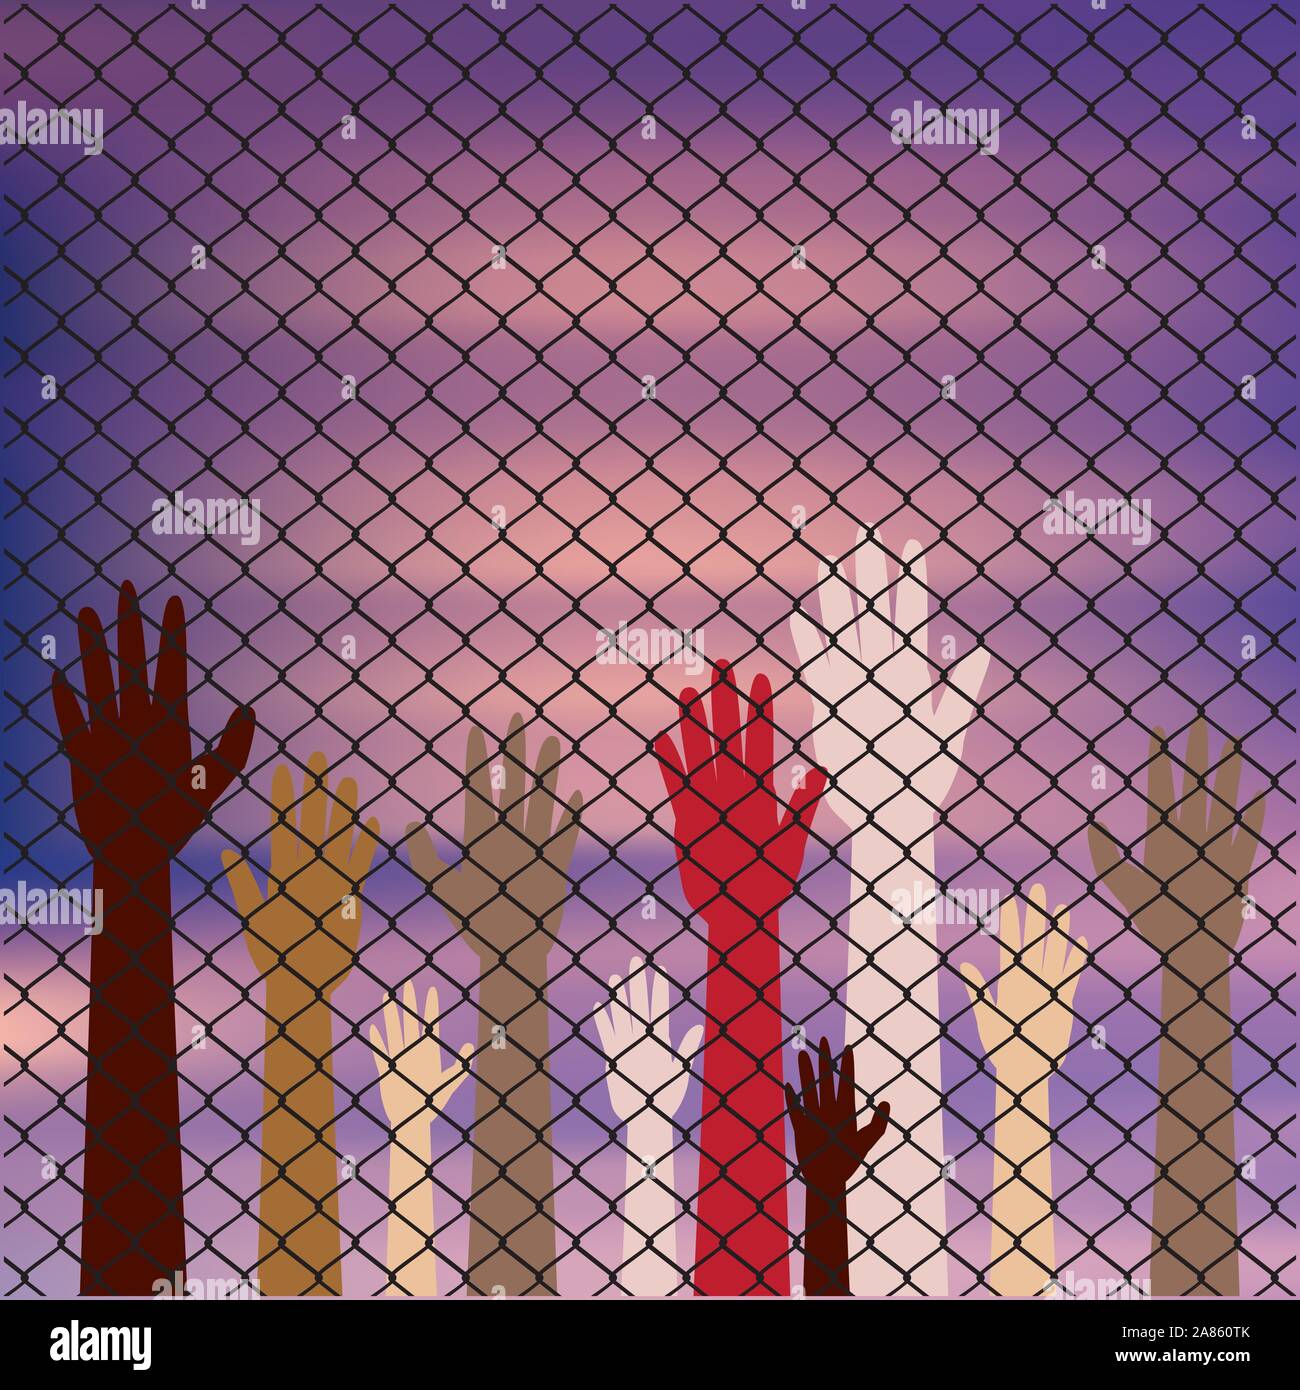 Diversity hand silhouettes behind metal wire fence against blurry sky background. Stock Vector